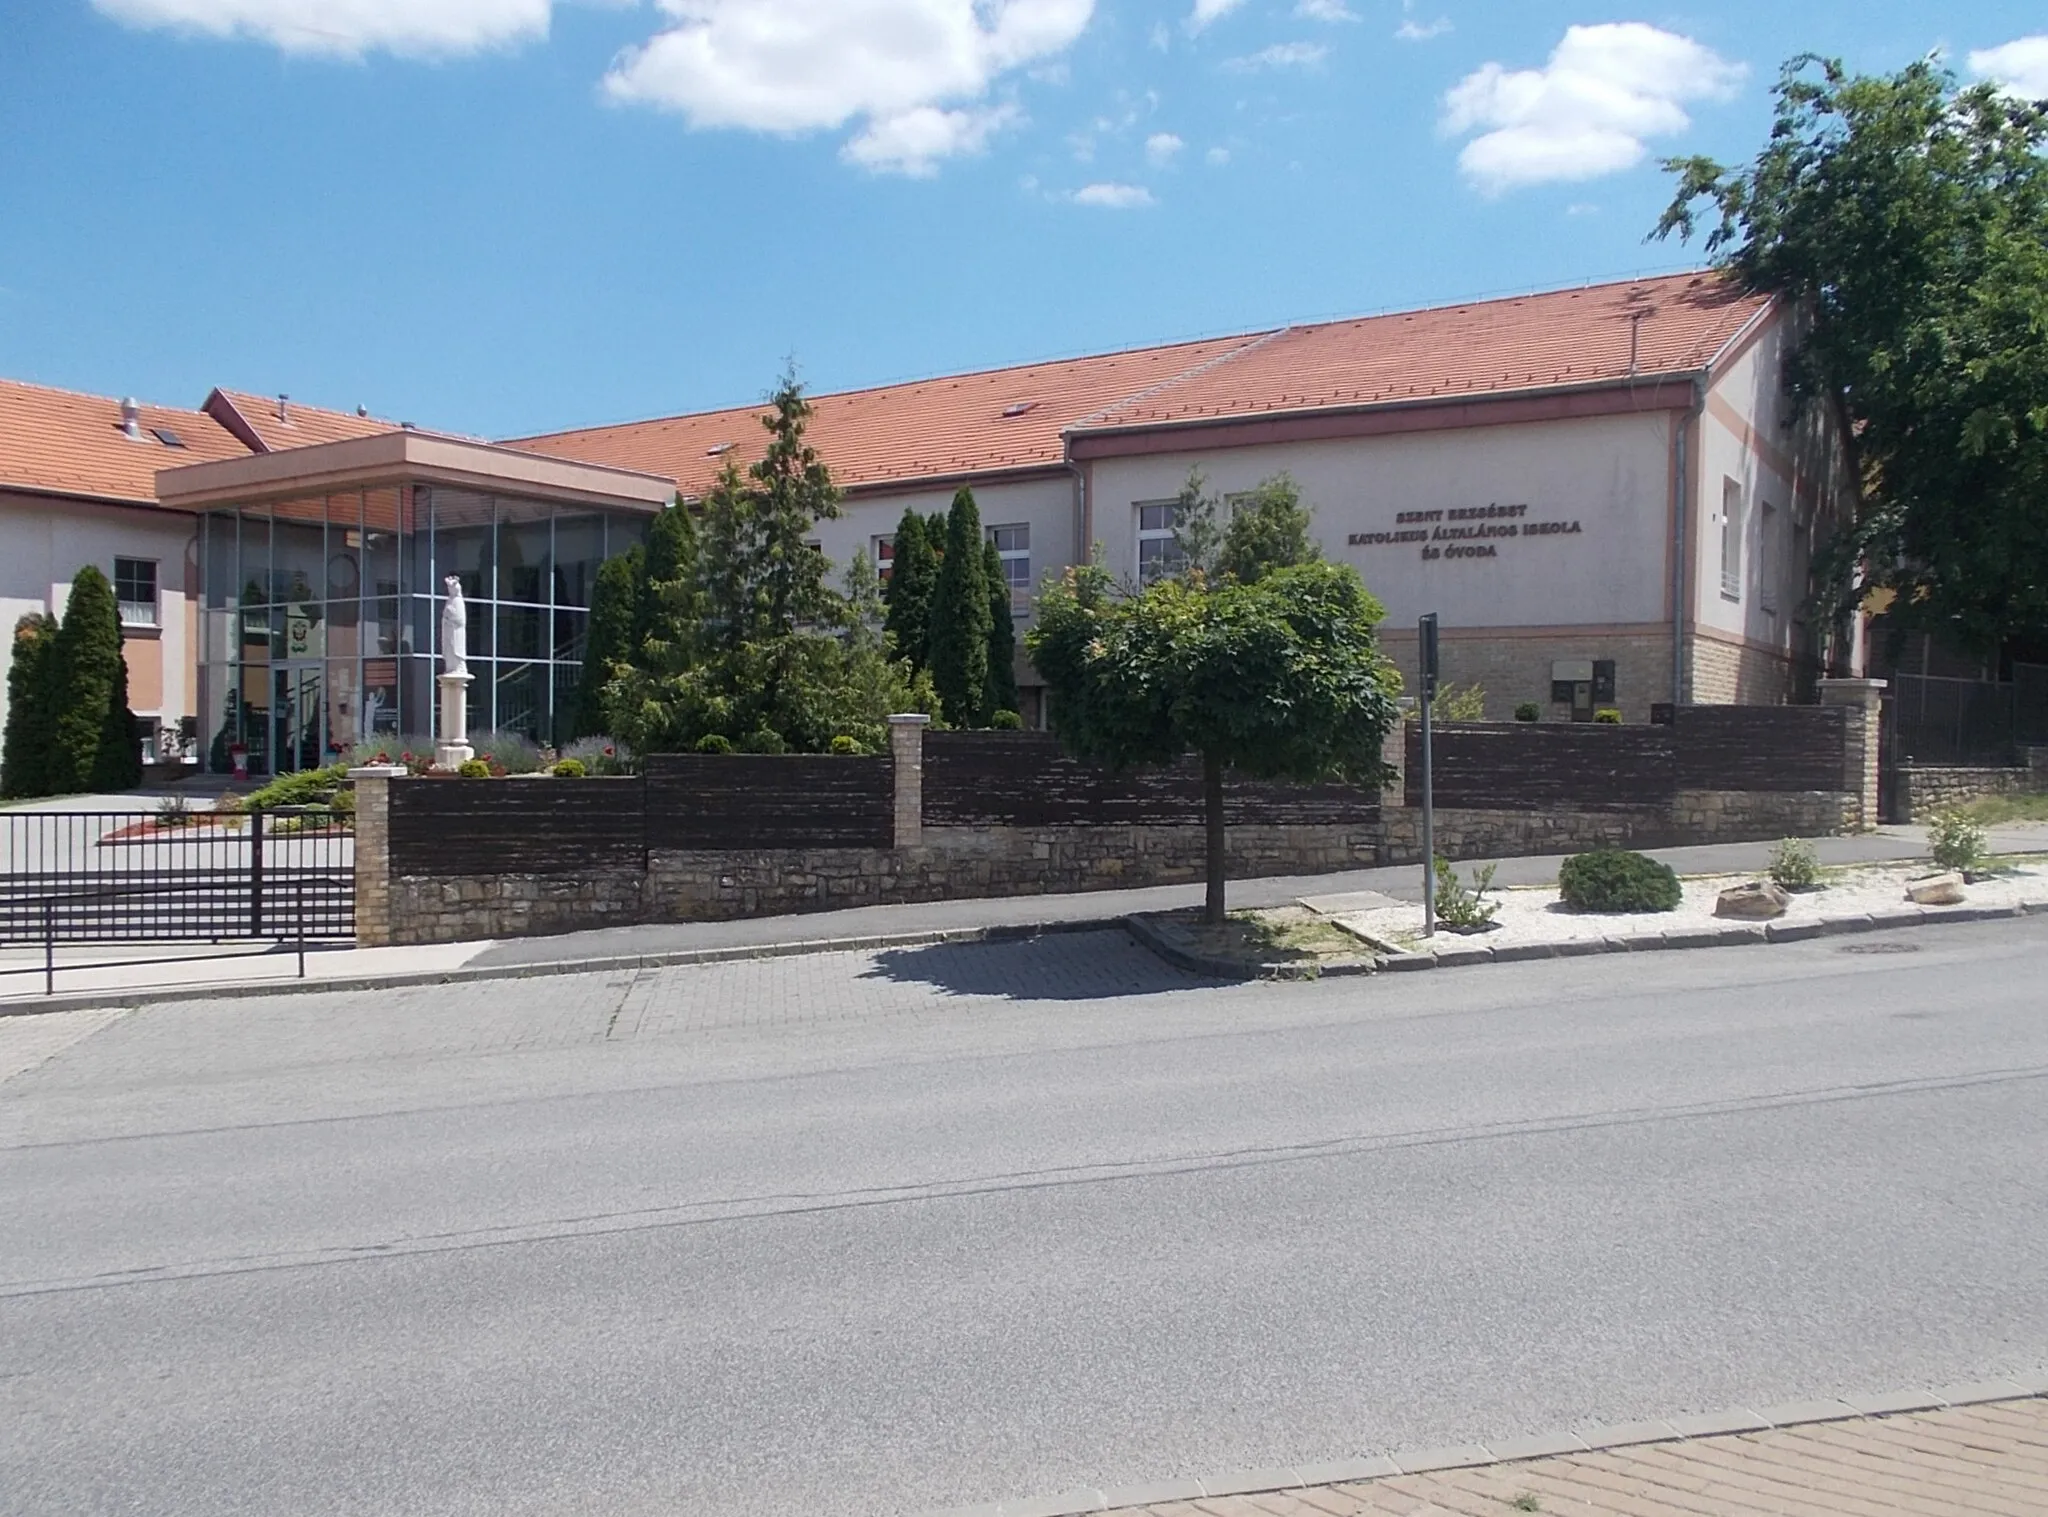 Photo showing: St. Elizabeth's Catholic Primary and Kindergarten. Inside in the aula is a St. Elizabeth relief by Károly Fésűs (2008 gypsum?? works, size 5m x 2.5m) and outside in the street side garden/courtyard is a St. Elizabeth by Károly Fésűs (2003 statue, which is about 1.30m high, stands on a 1.70m high pedestal, decorated with three columns) - 7 Kossuth Square, City centre, Pécel, Pest County, Hungary.